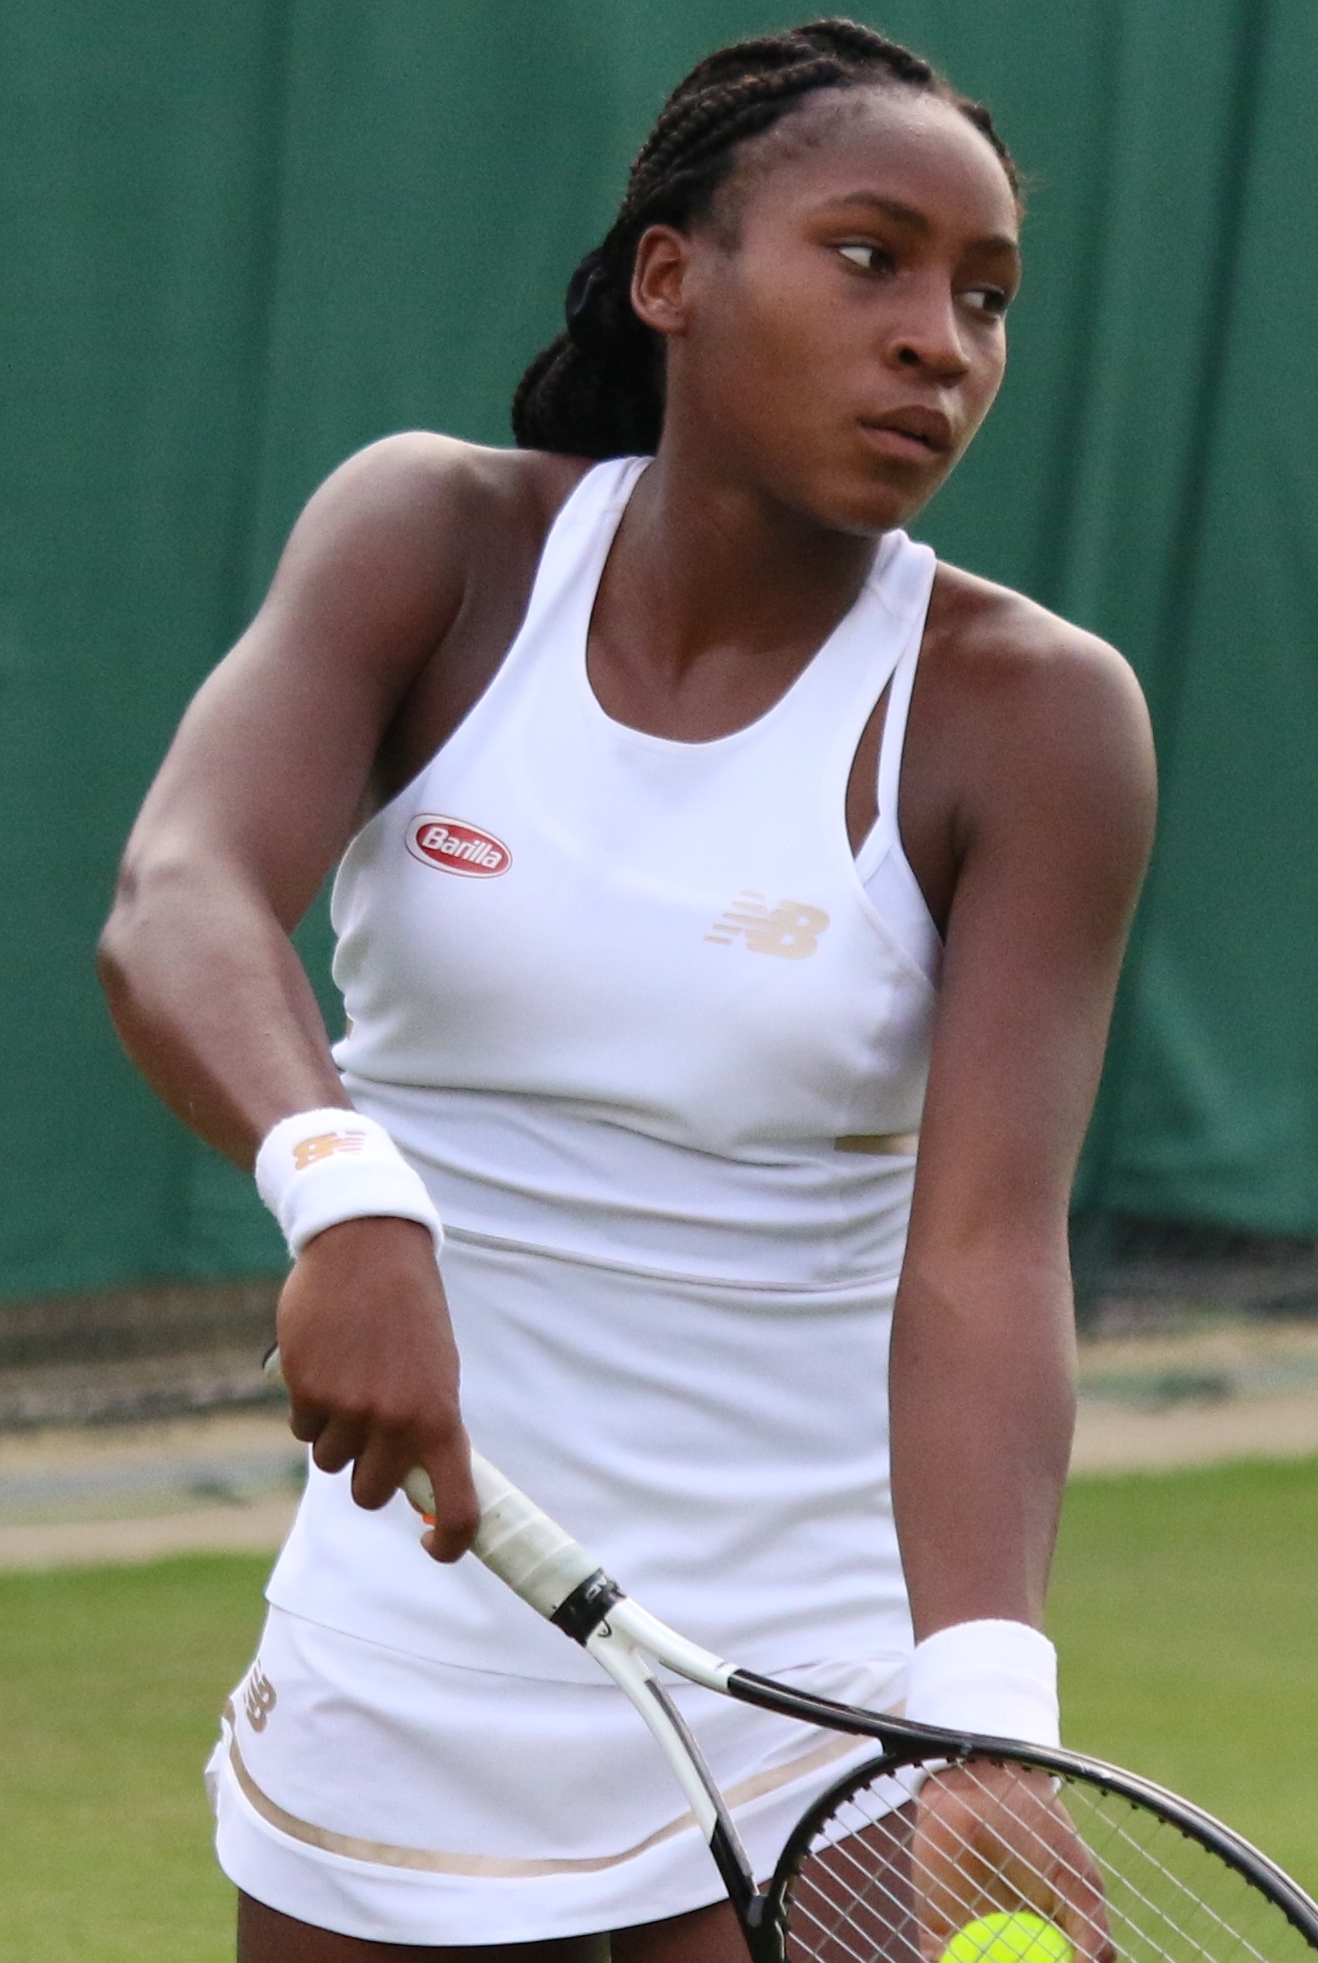 Tennis champion Coco Gauff, now 19, first rose to prominence in 2019 when she defeated Venus Williams in Wimbledon.